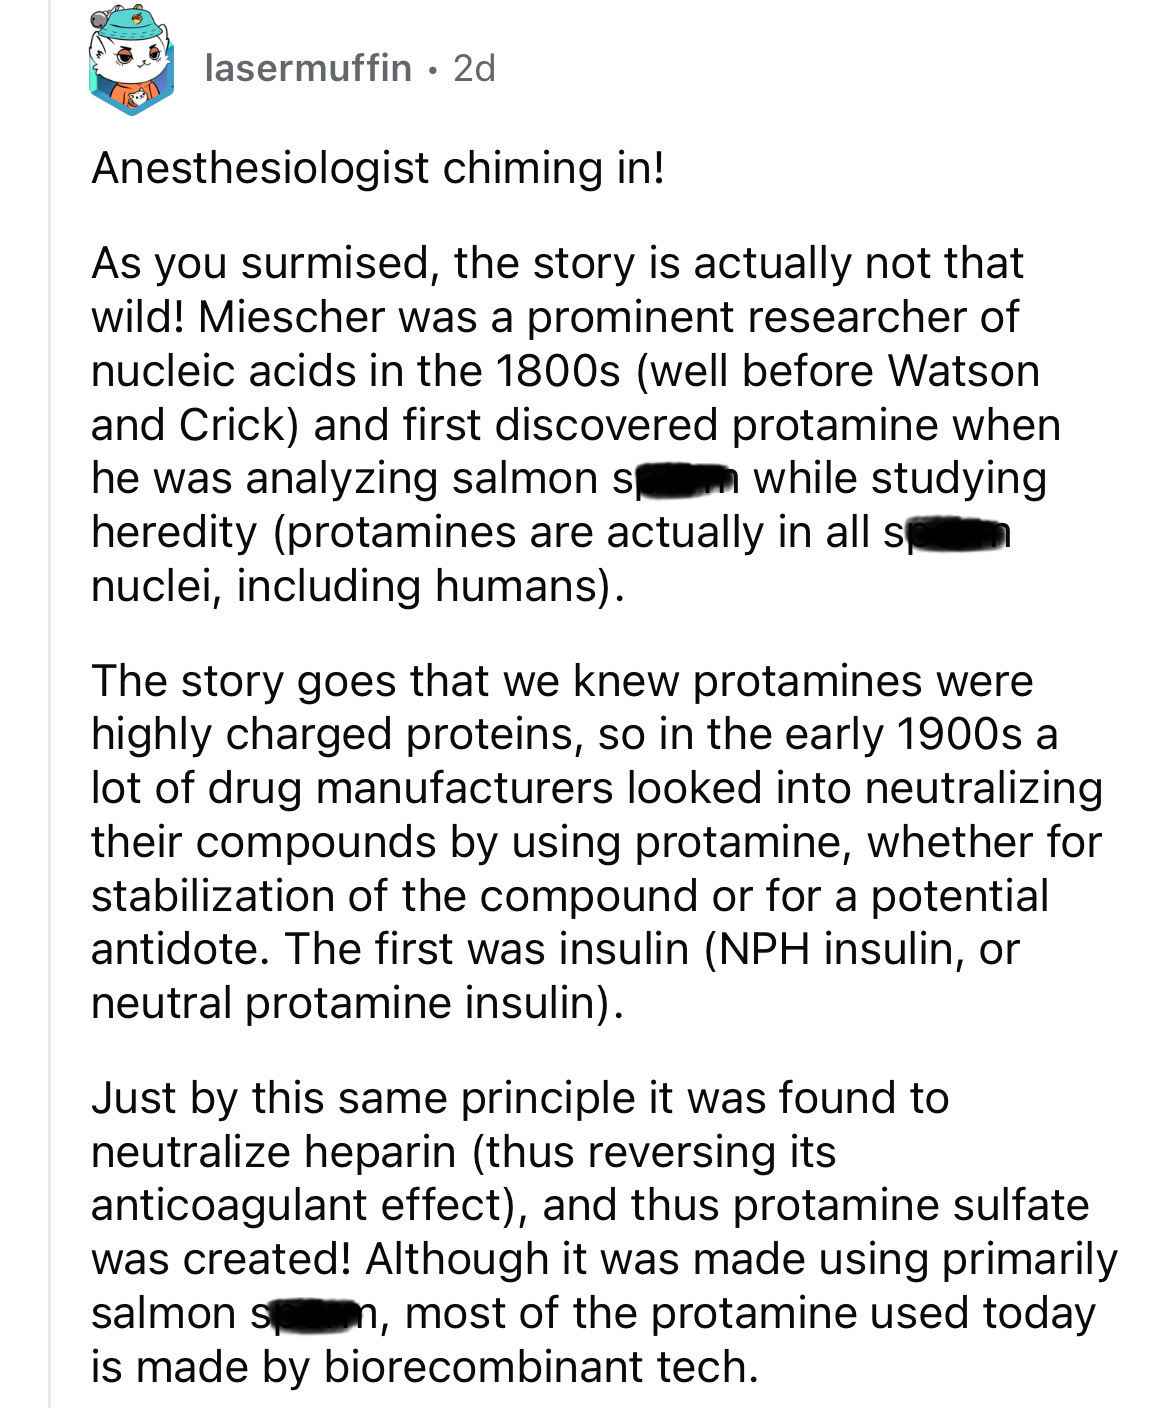 document - lasermuffin 2d Anesthesiologist chiming in! As you surmised, the story is actually not that wild! Miescher was a prominent researcher of nucleic acids in the 1800s well before Watson and Crick and first discovered protamine when he was analyzin